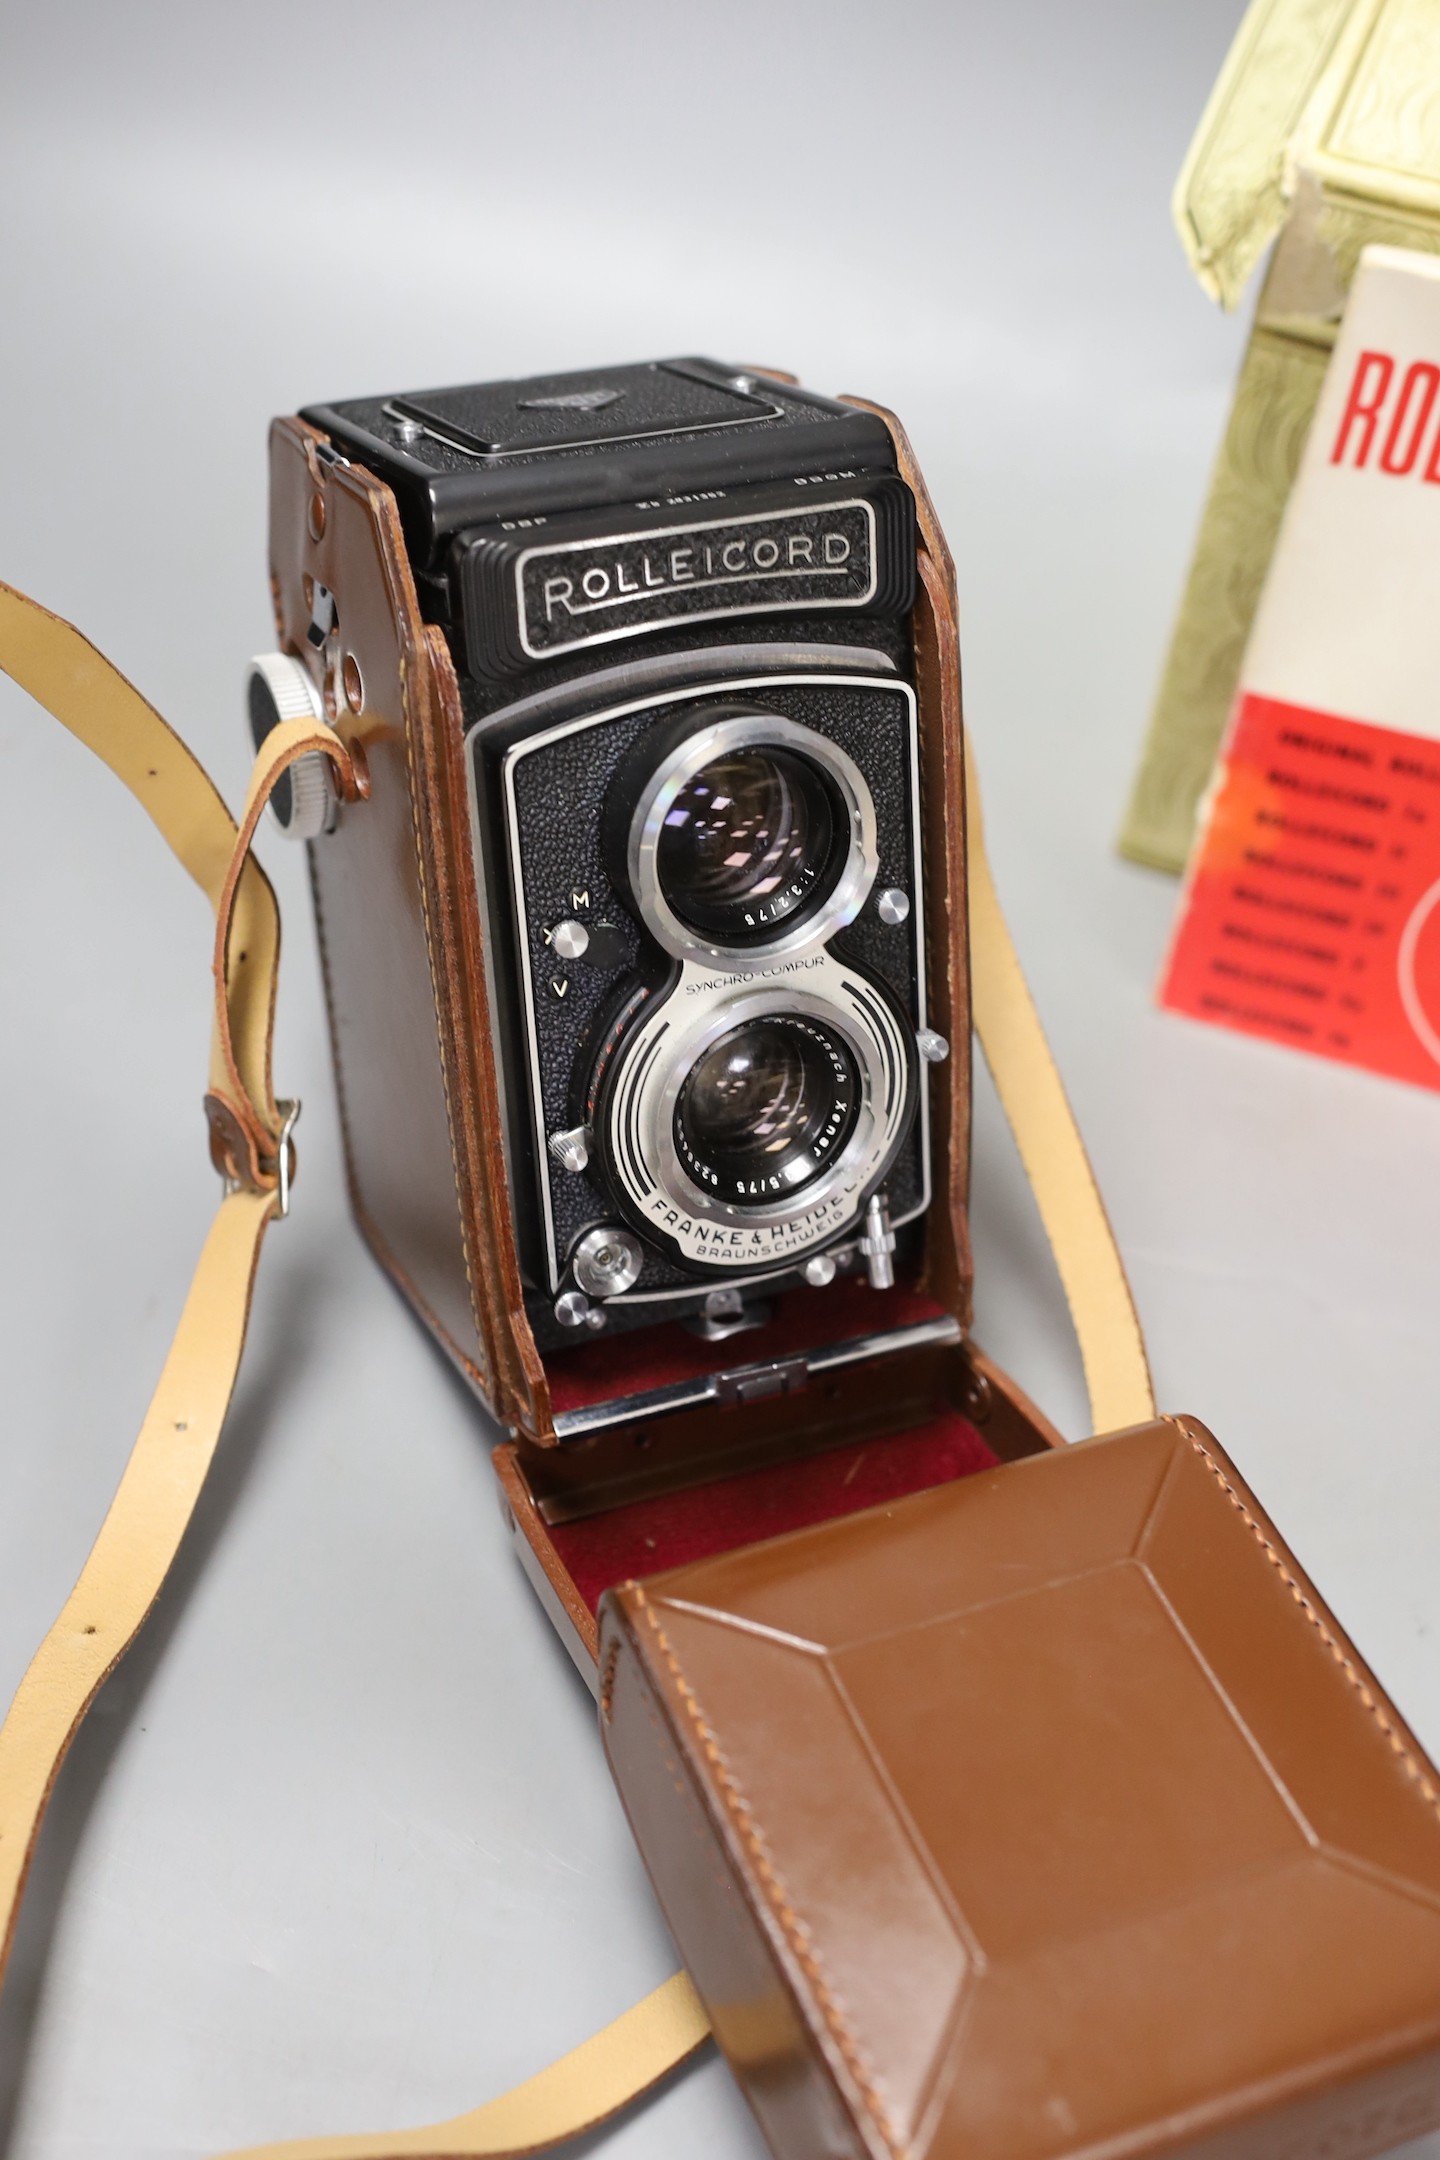 A Rolleicord Vb TLR Camera, serial no 2631352, with Schneider Kreuznach Xenar 75mm f/3.5 lens, leather case, paperwork and box